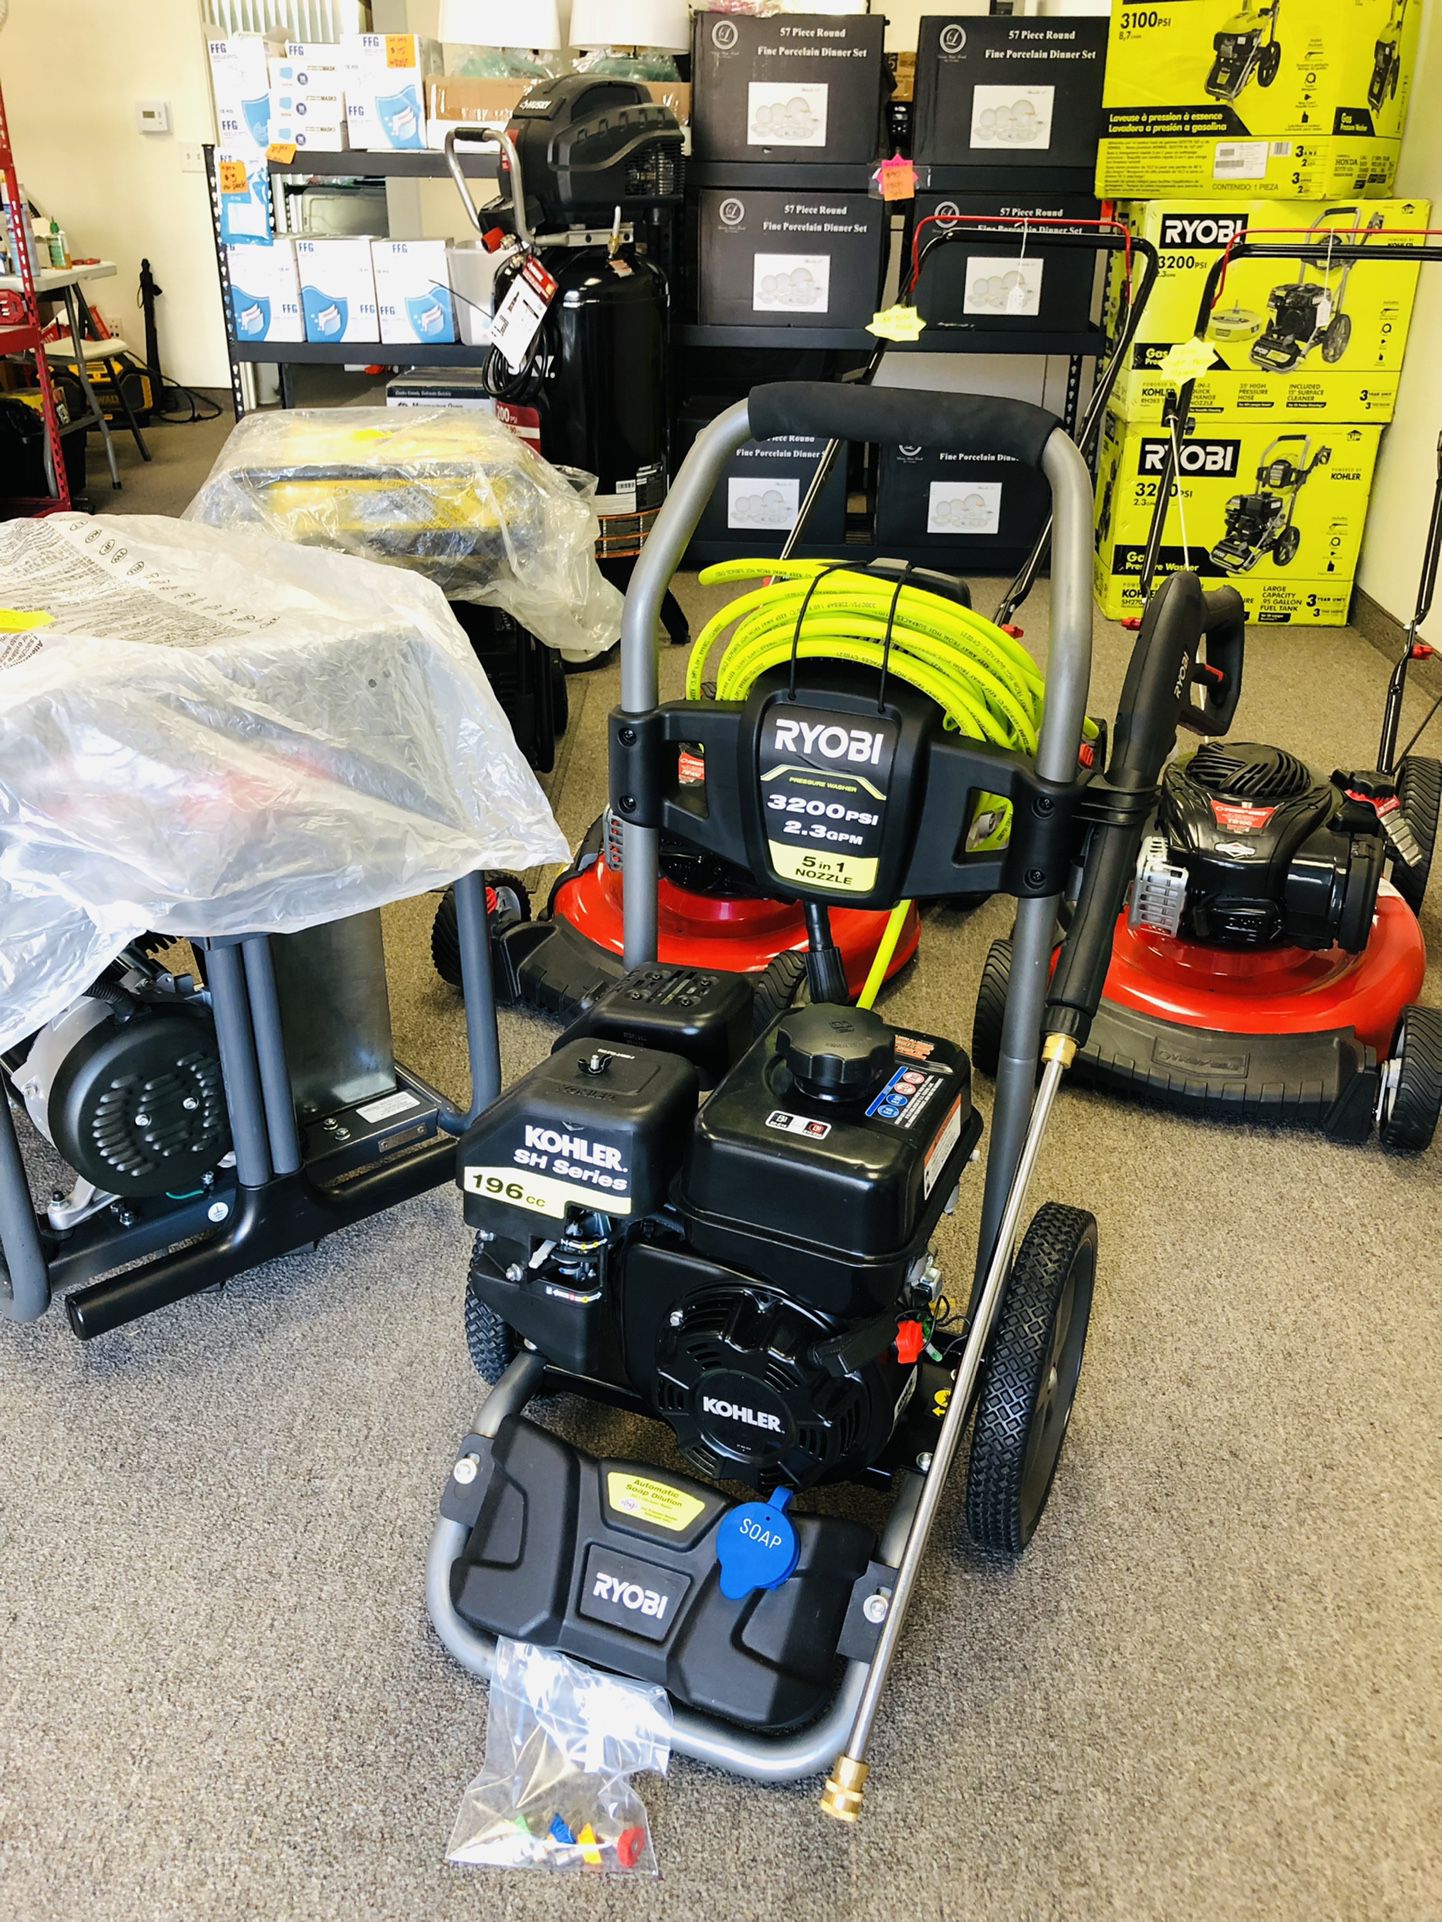 LIKE NEW ! FULLY ASSEMBLED READY TO  RYOBI 3200 PSI GAS POWERED PRESSURE WASHER WITH A KOHLER MOTOR SH !SERIES !! AND 4 TIPS 